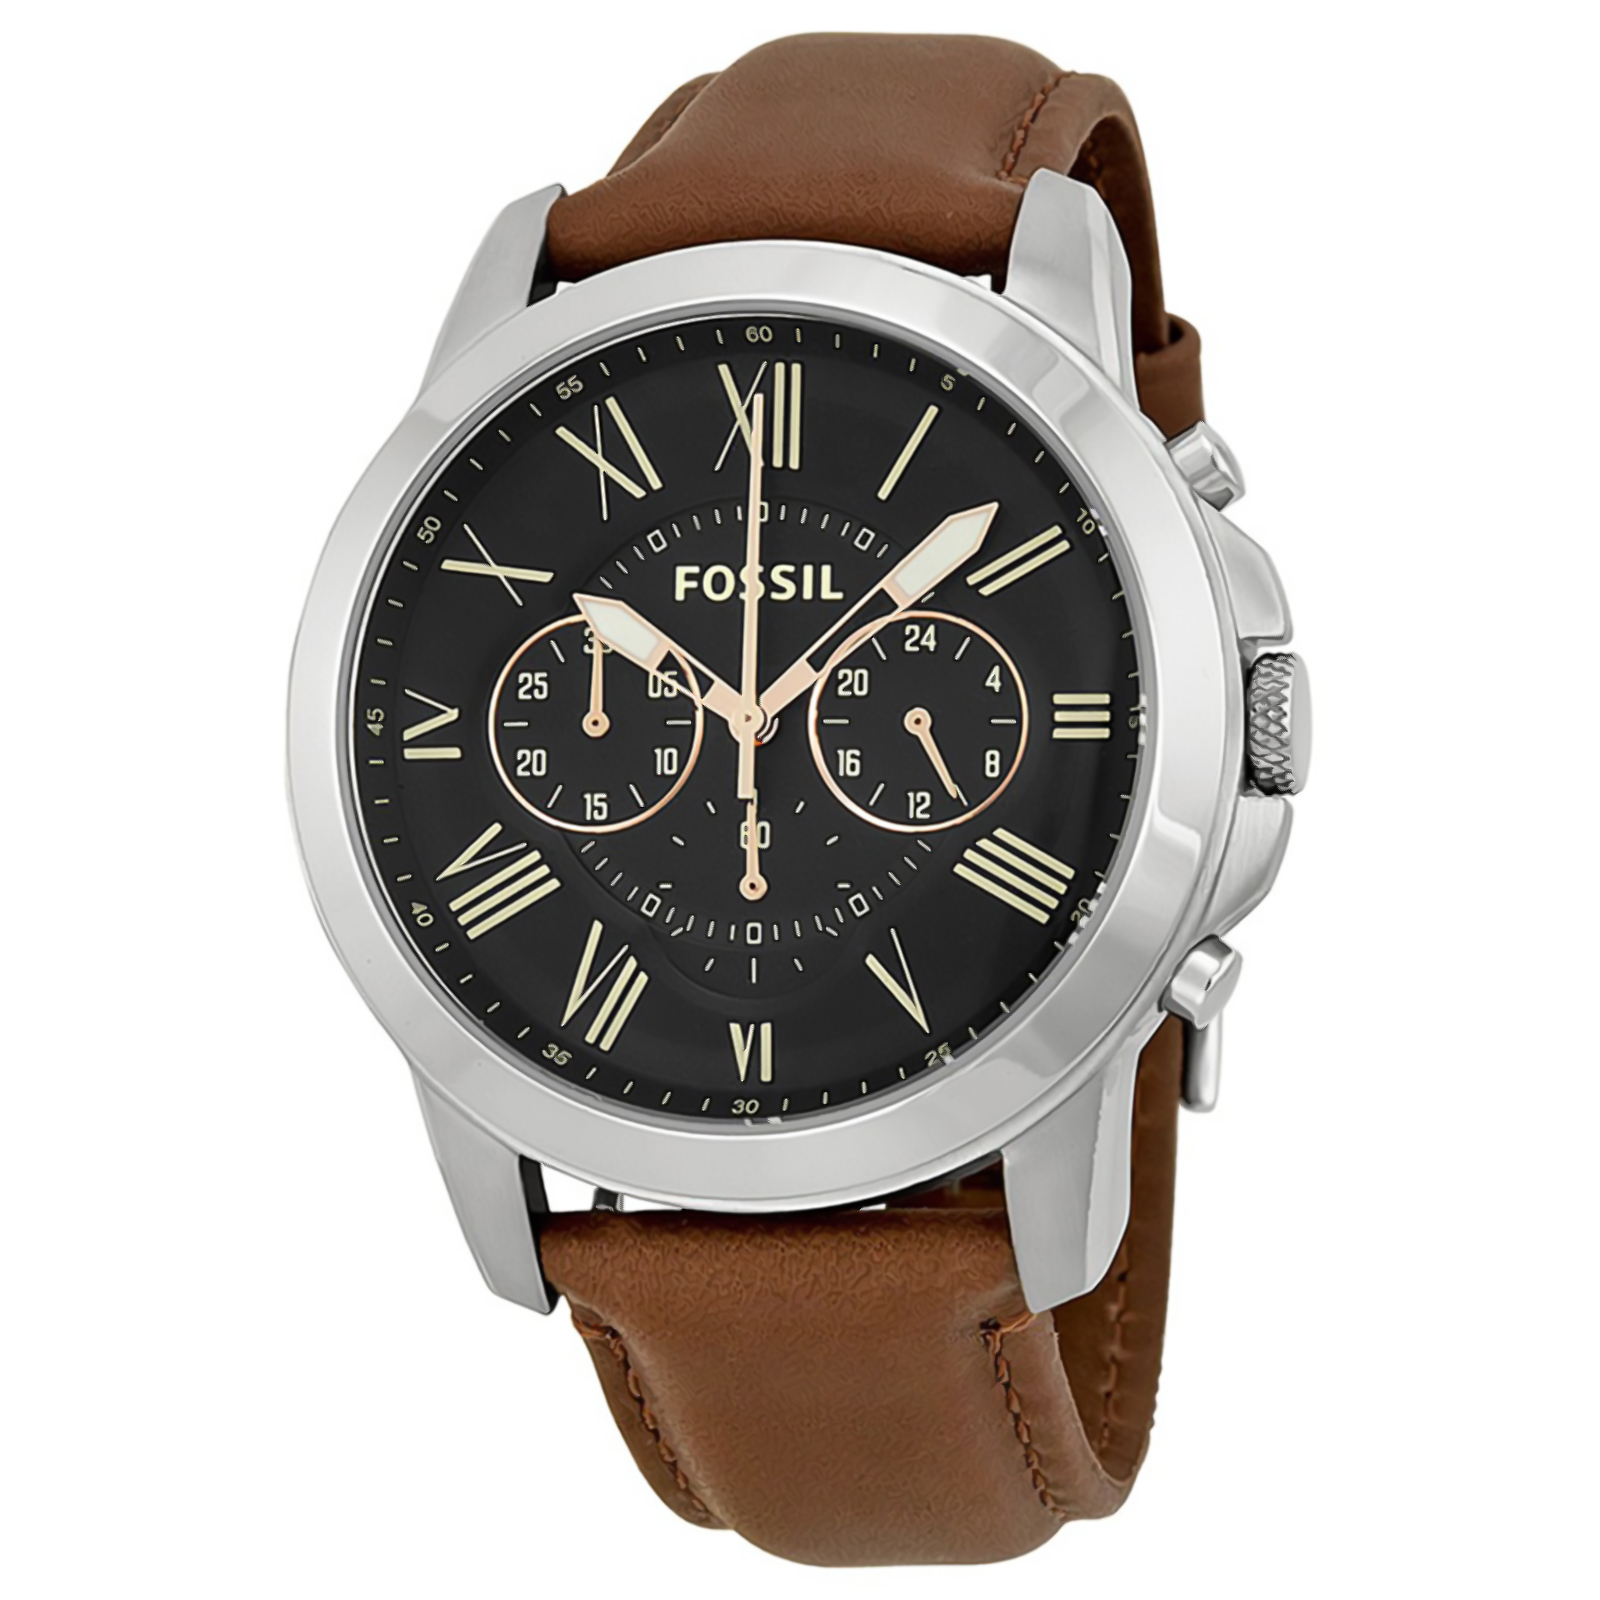 Fossil FS4813 Men’s Grant Genuine Leather Watch - Brown